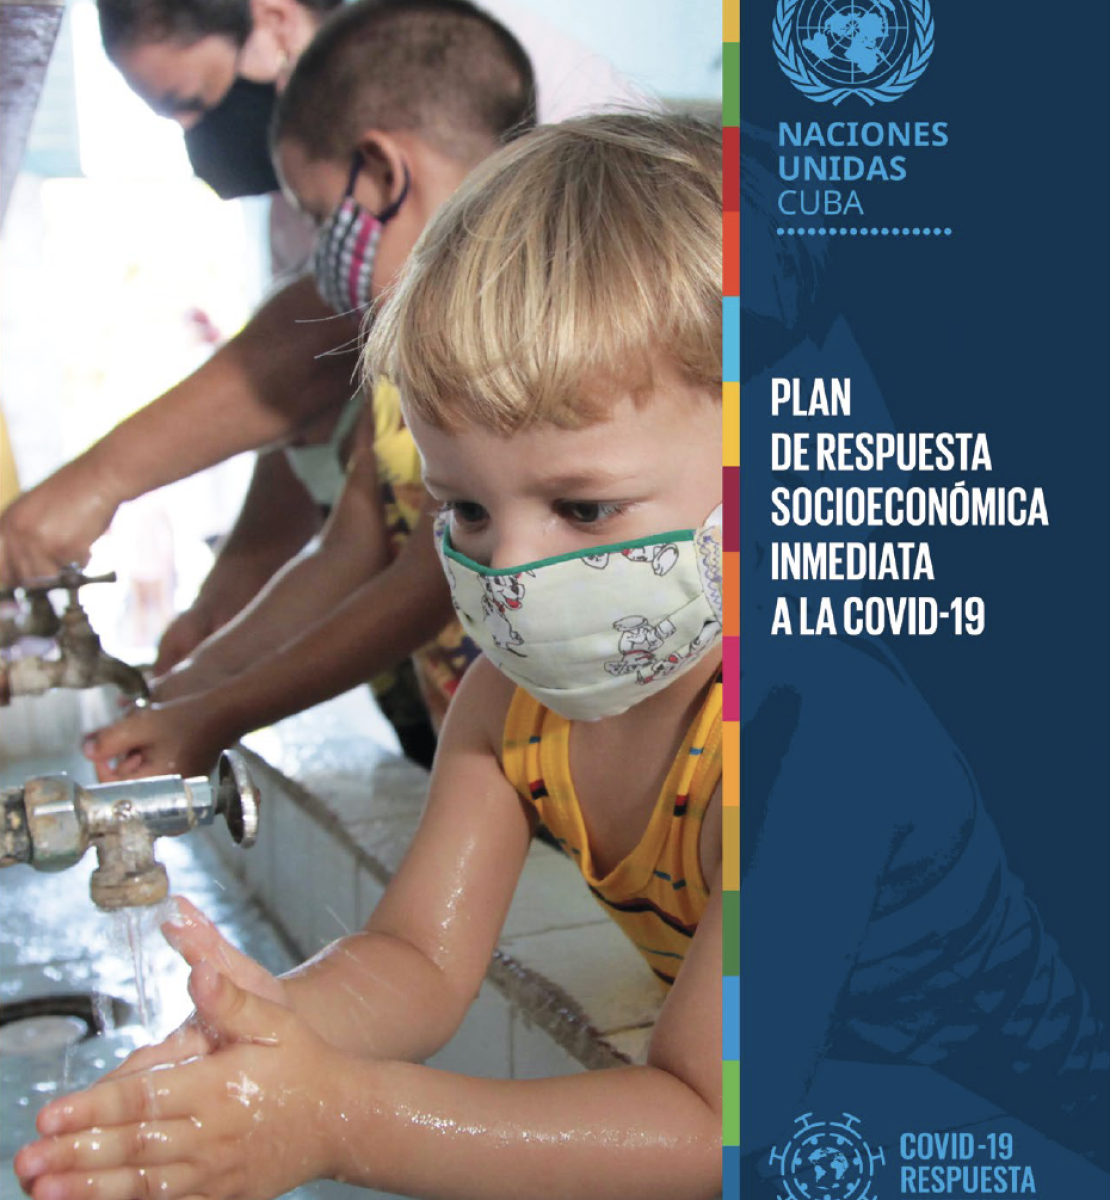 The cover shows on the left a photo of children and adults washing their hands with the title to the right in white against a blue vertical overlay.